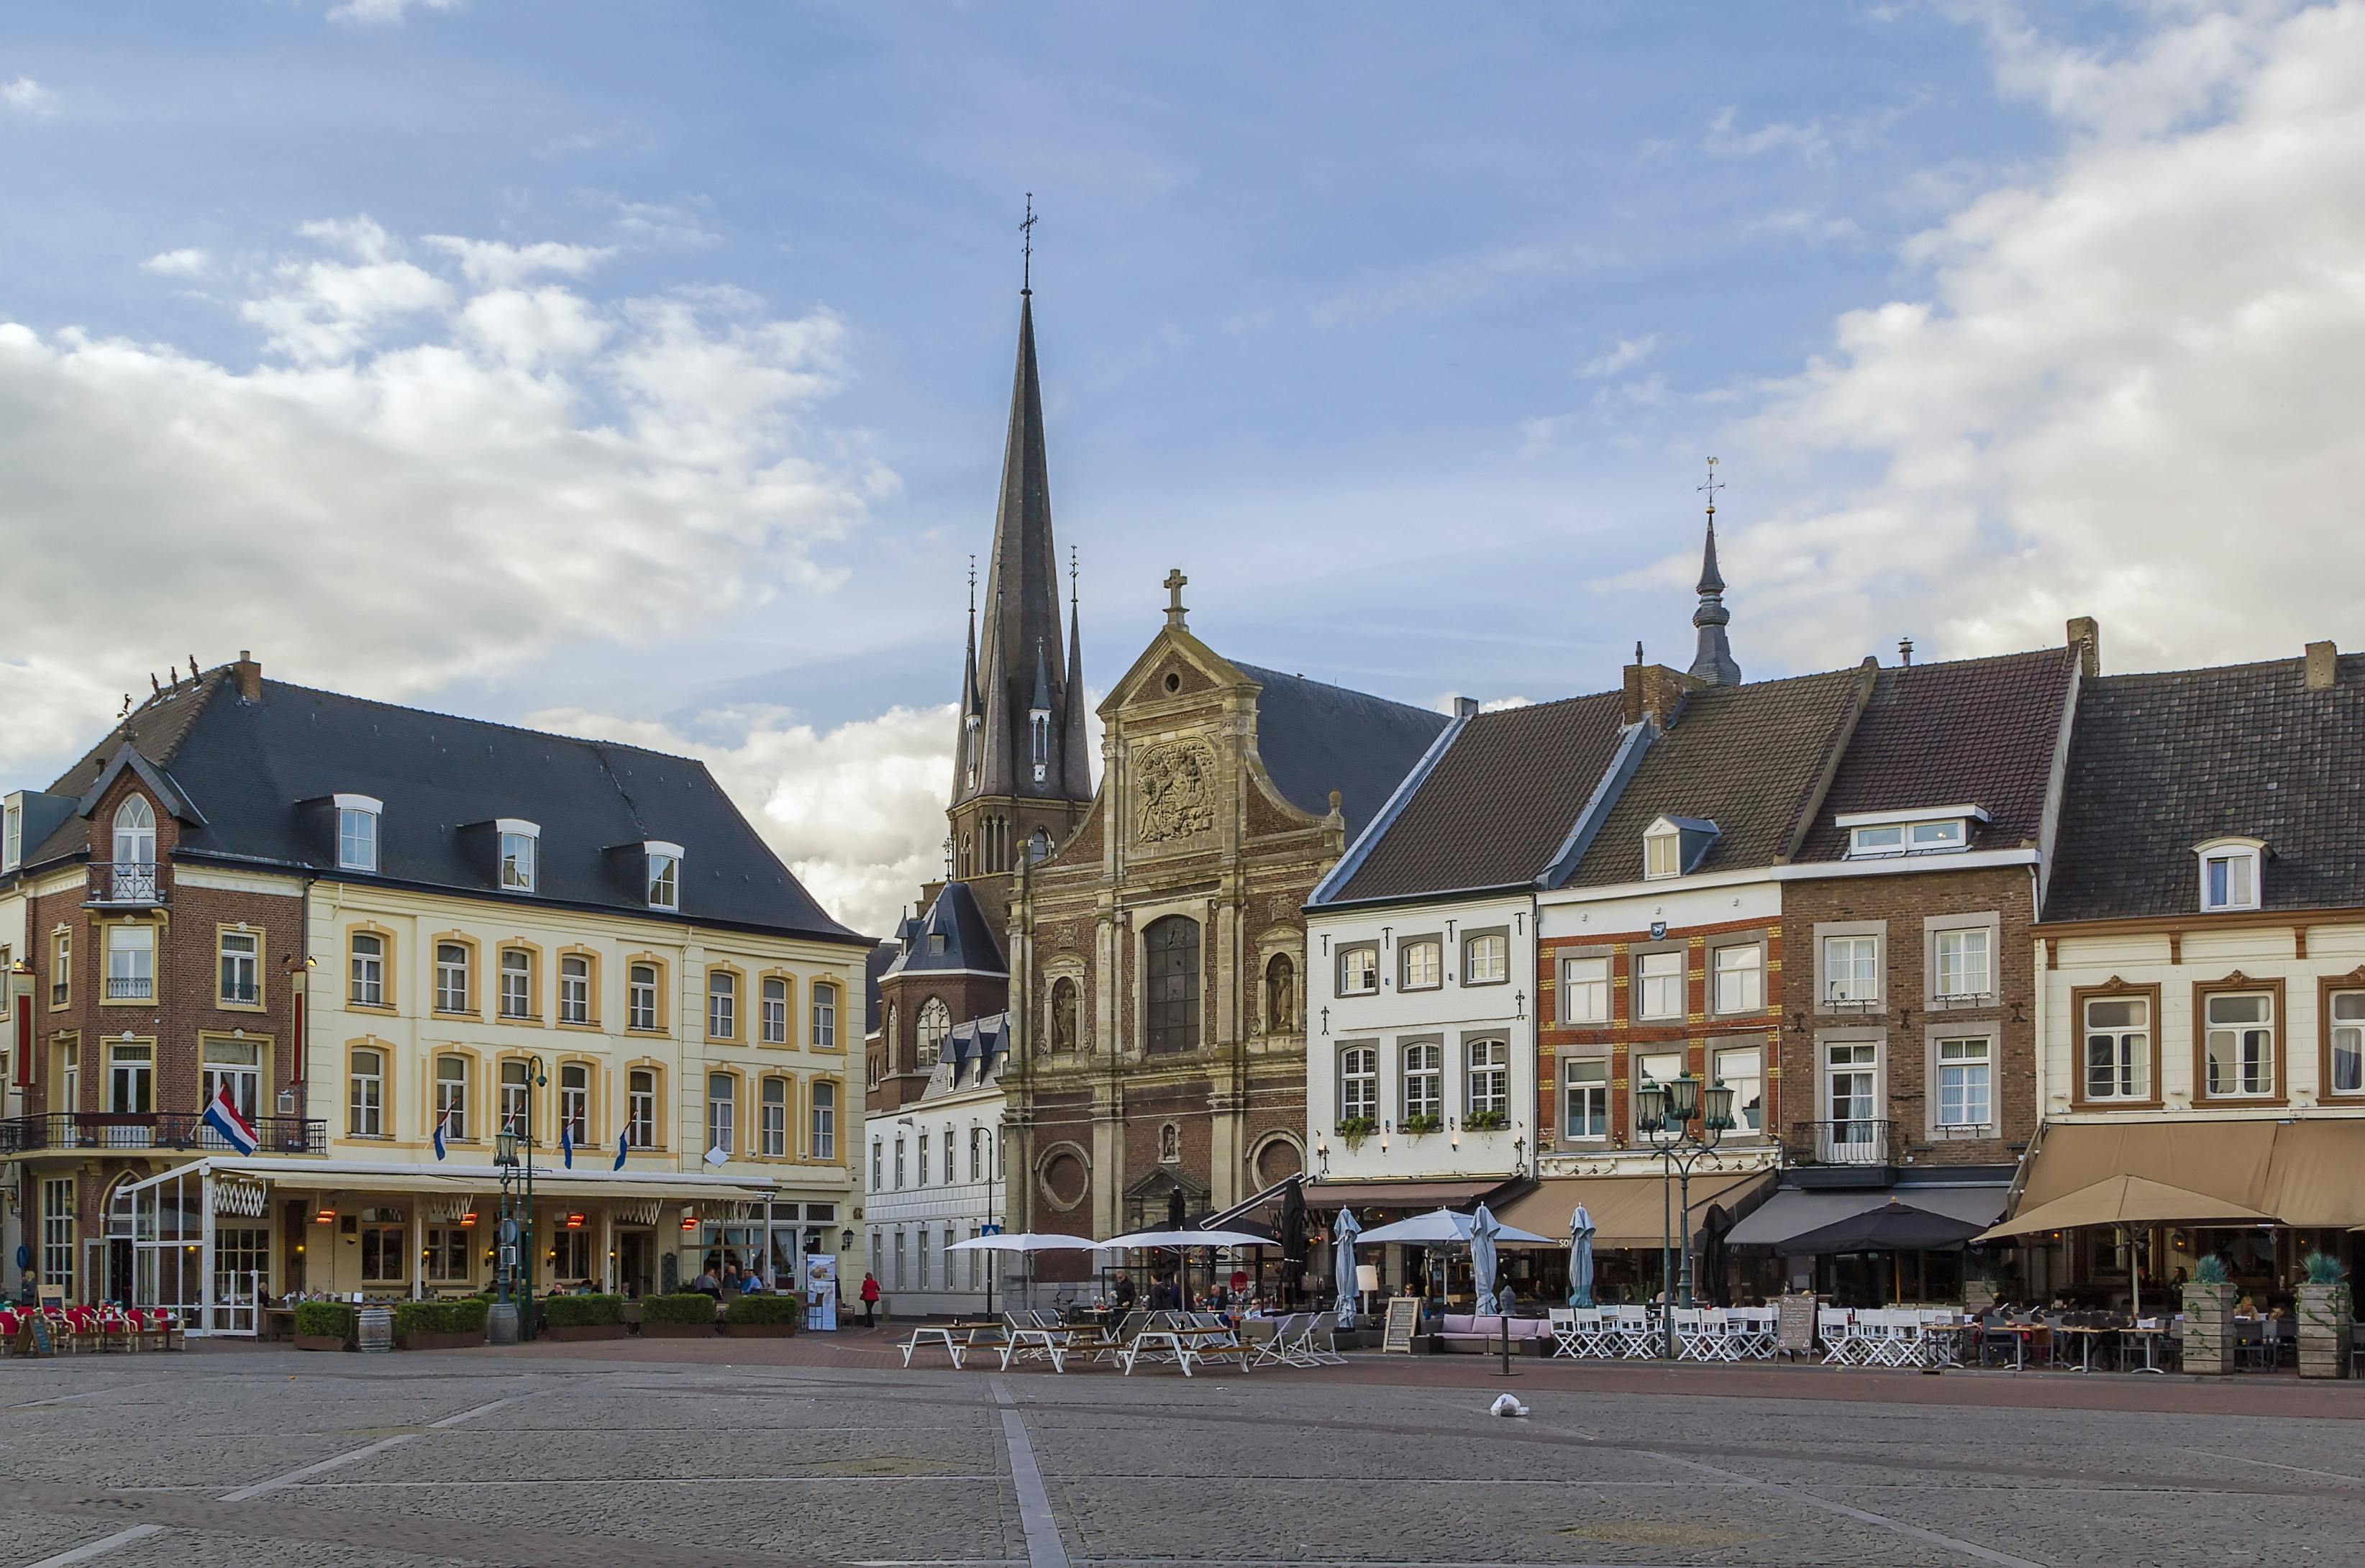 Self guided tour with interactive city game of Sittard Musement